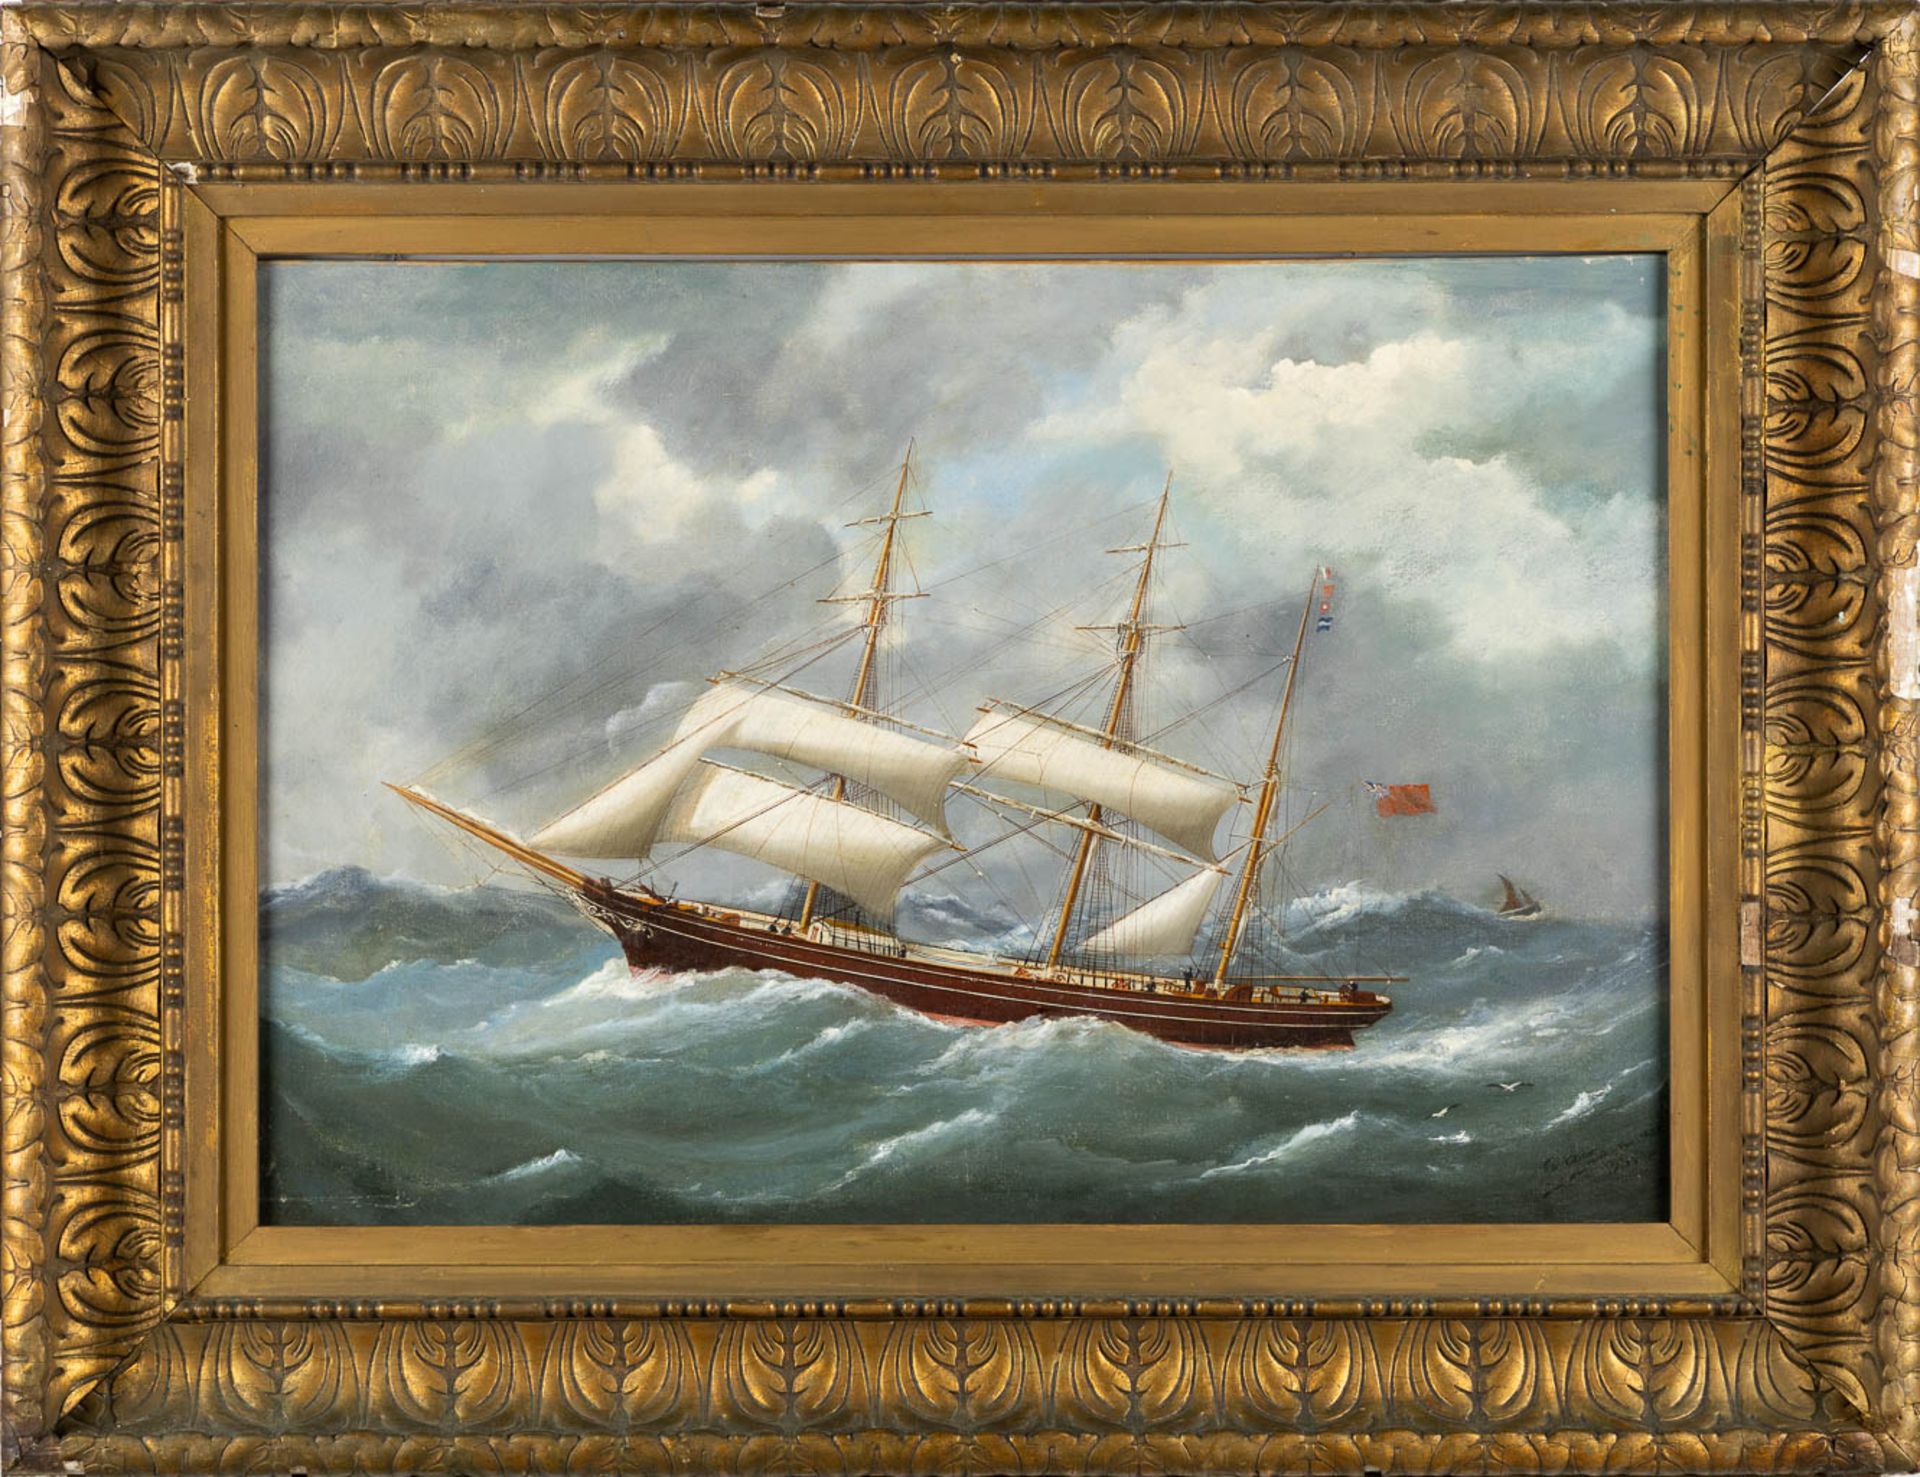 Edward ADAMS (XIX-XX) 'Charlotte Young, Le Havre' oil on canvas. 1885. (W:91 x H:61 cm) - Image 3 of 11